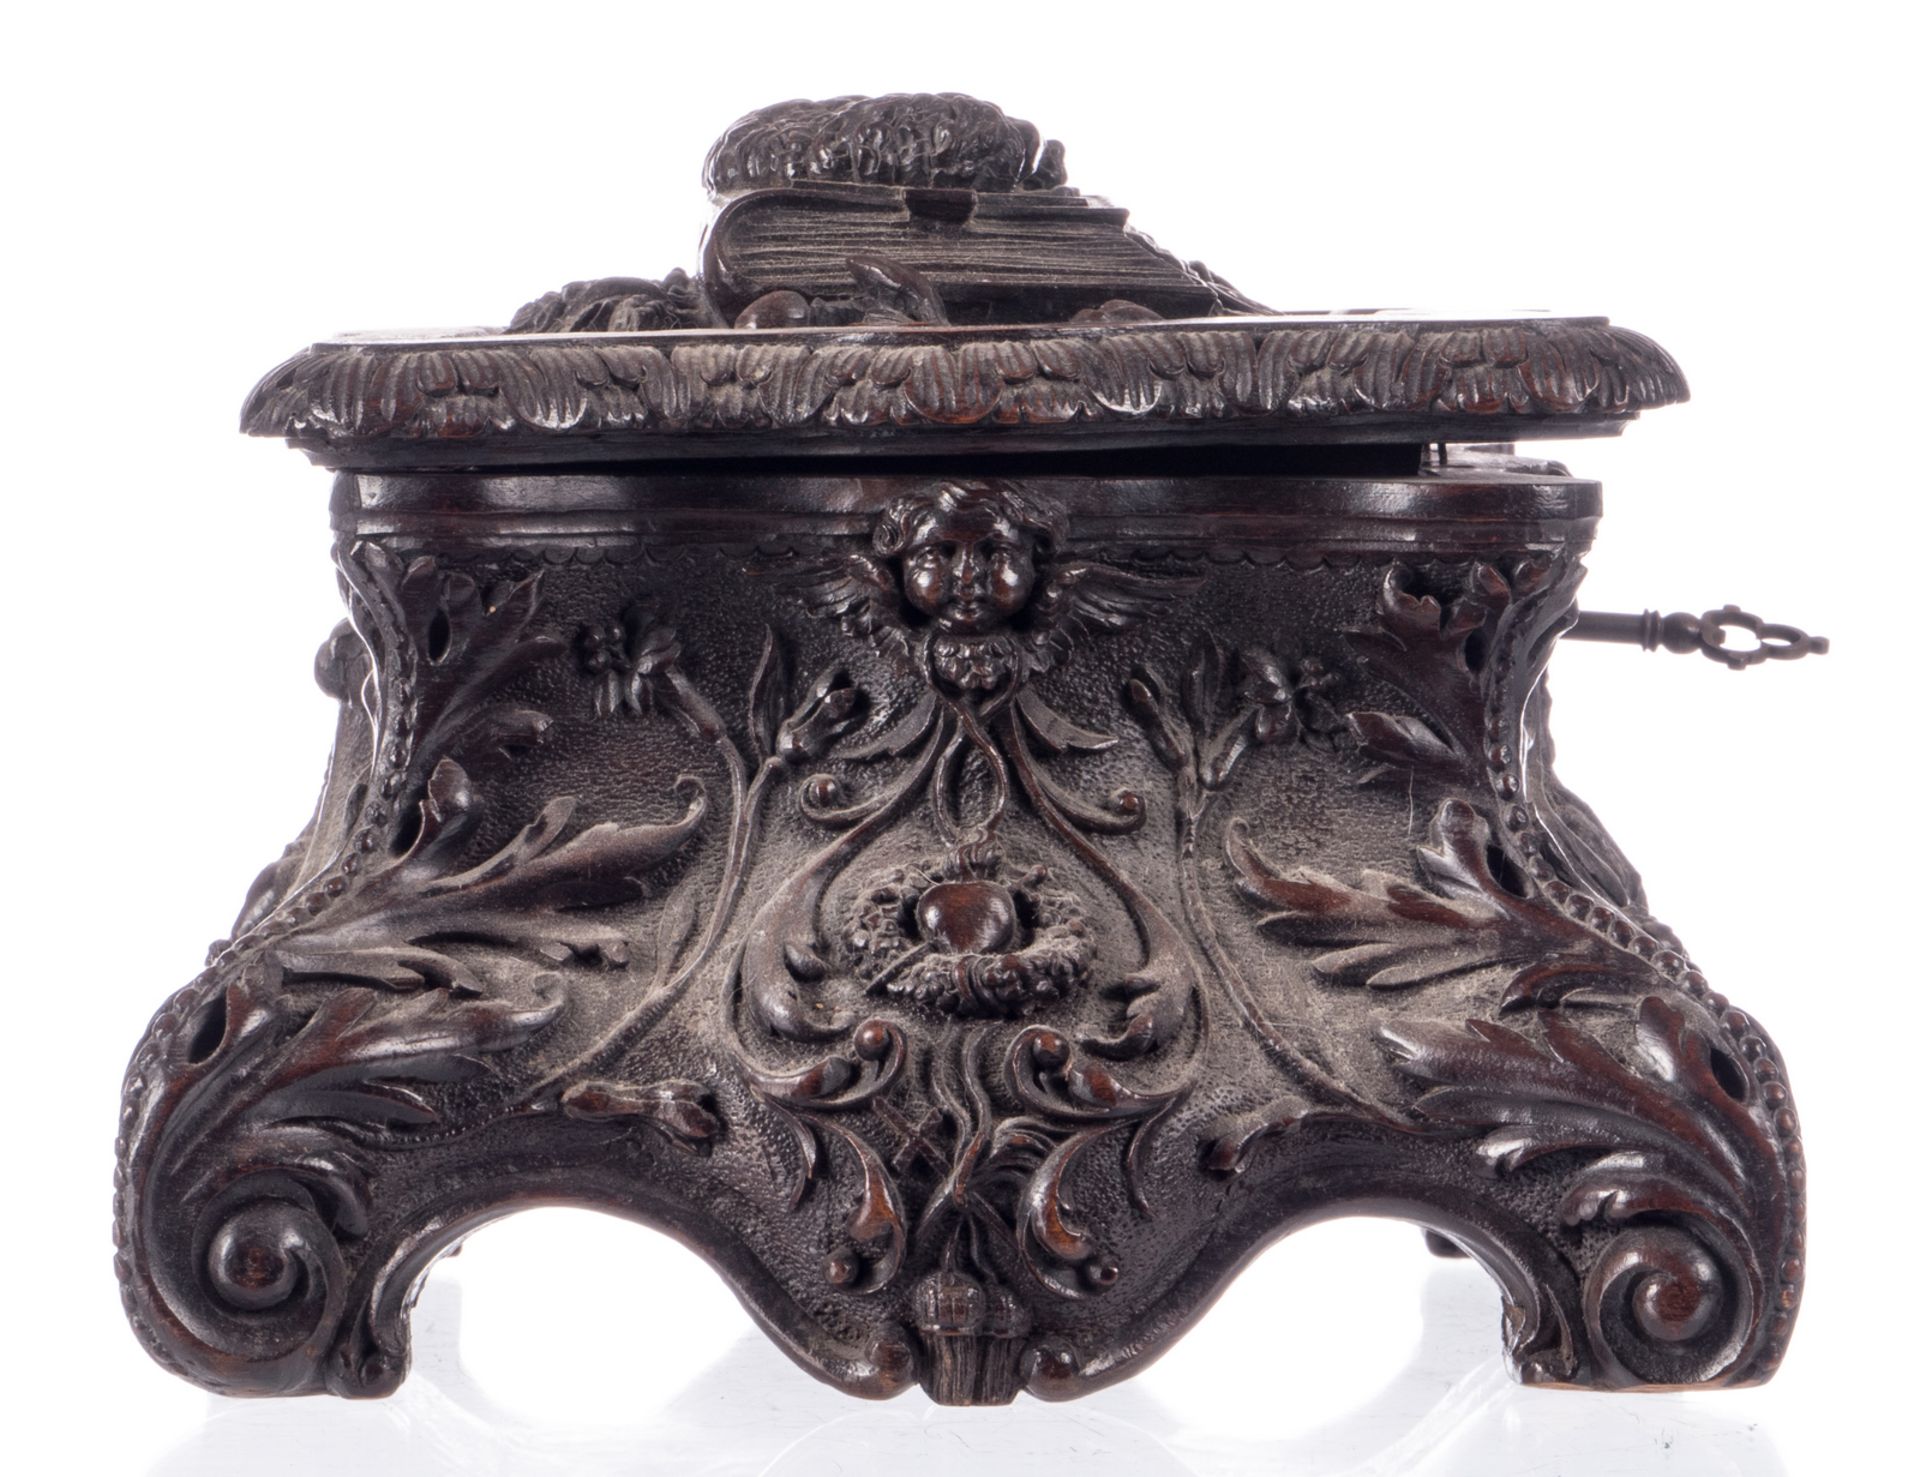 A sculpted walnut jewelry box decorated with religious symbols, H 16 - W 32 - D 26 cm - Bild 5 aus 11